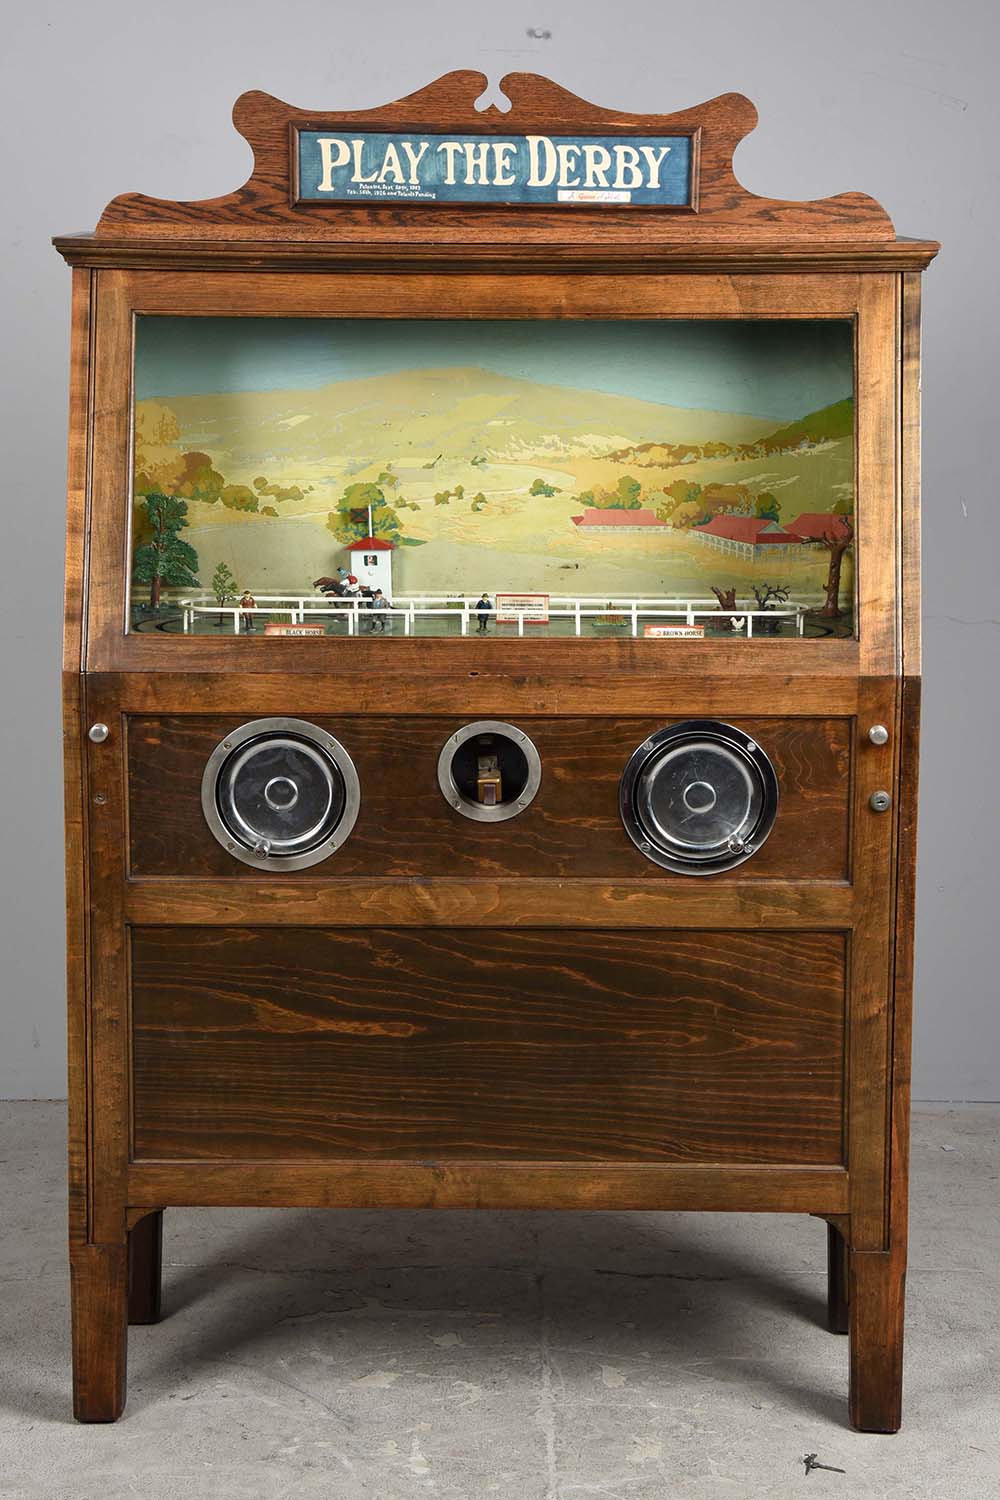 5¢ Chester-Pollard Play the Derby Arcade Game, Estimated at $35,000-50,000.